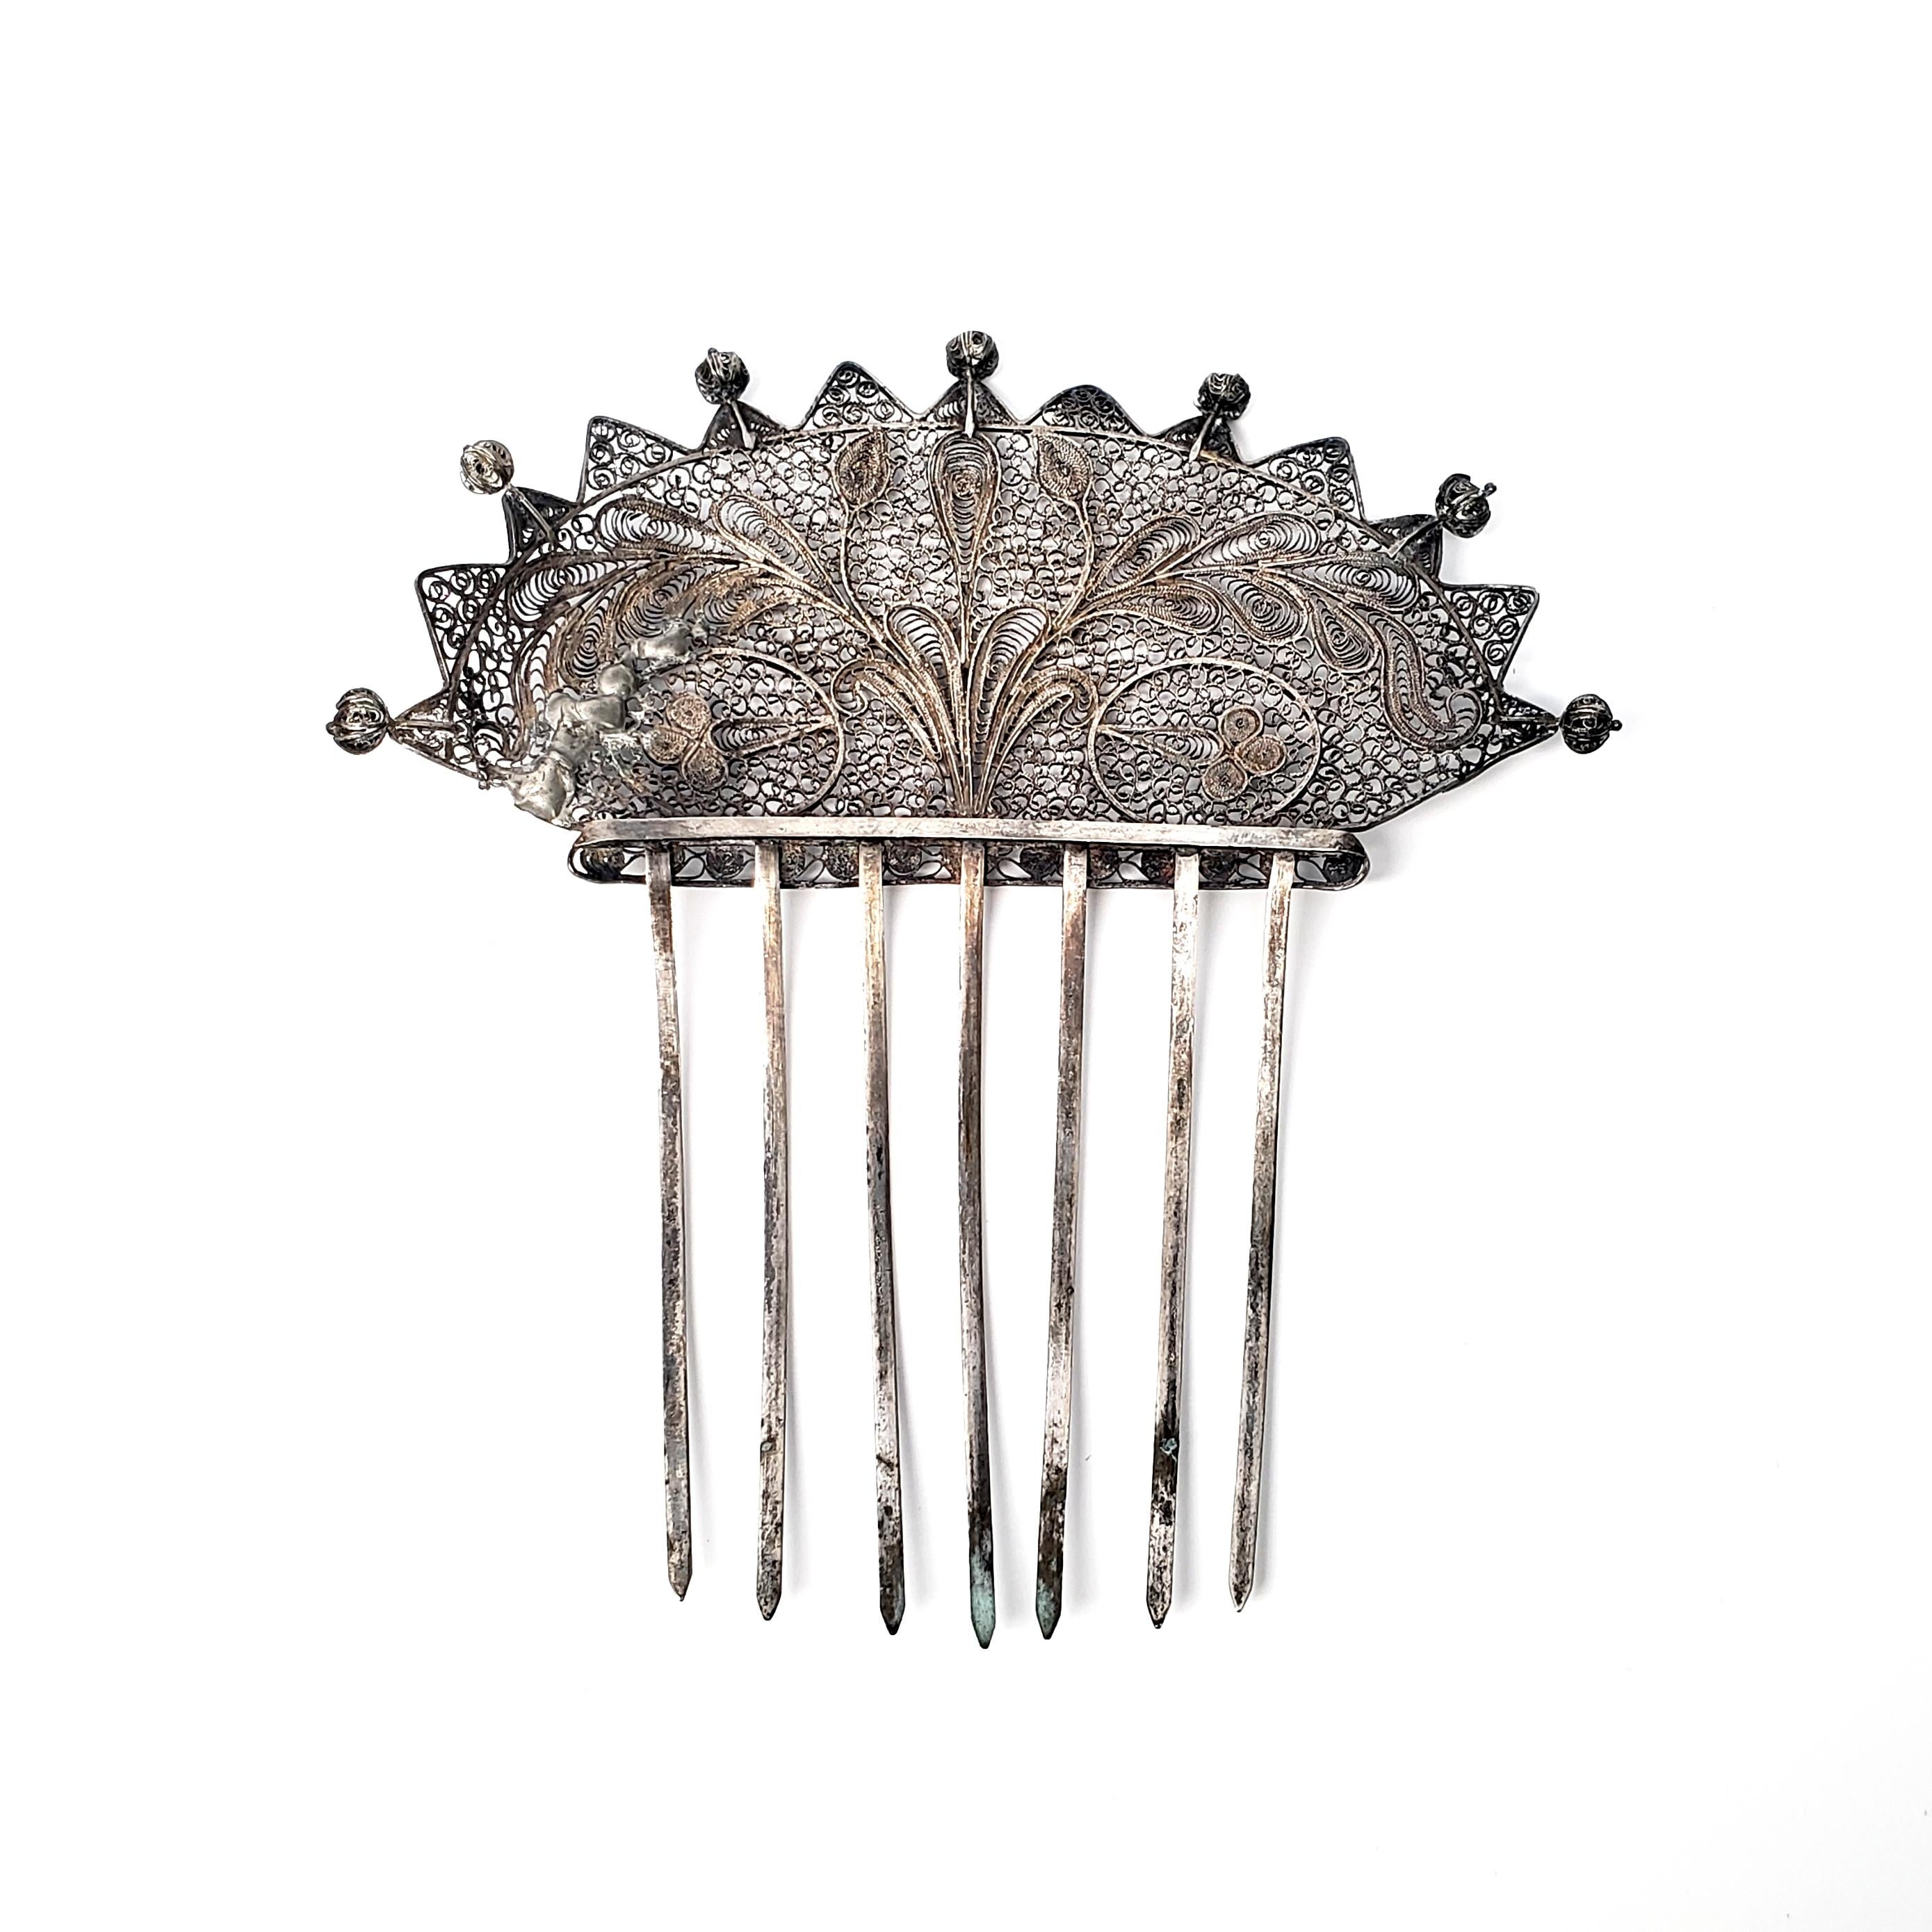 Large antique silver hair comb.

Beautiful filigree lace-like design with floral and leaf accents. Used for hairstyles typical of the late Victorian Era, circa 1890-1900. 